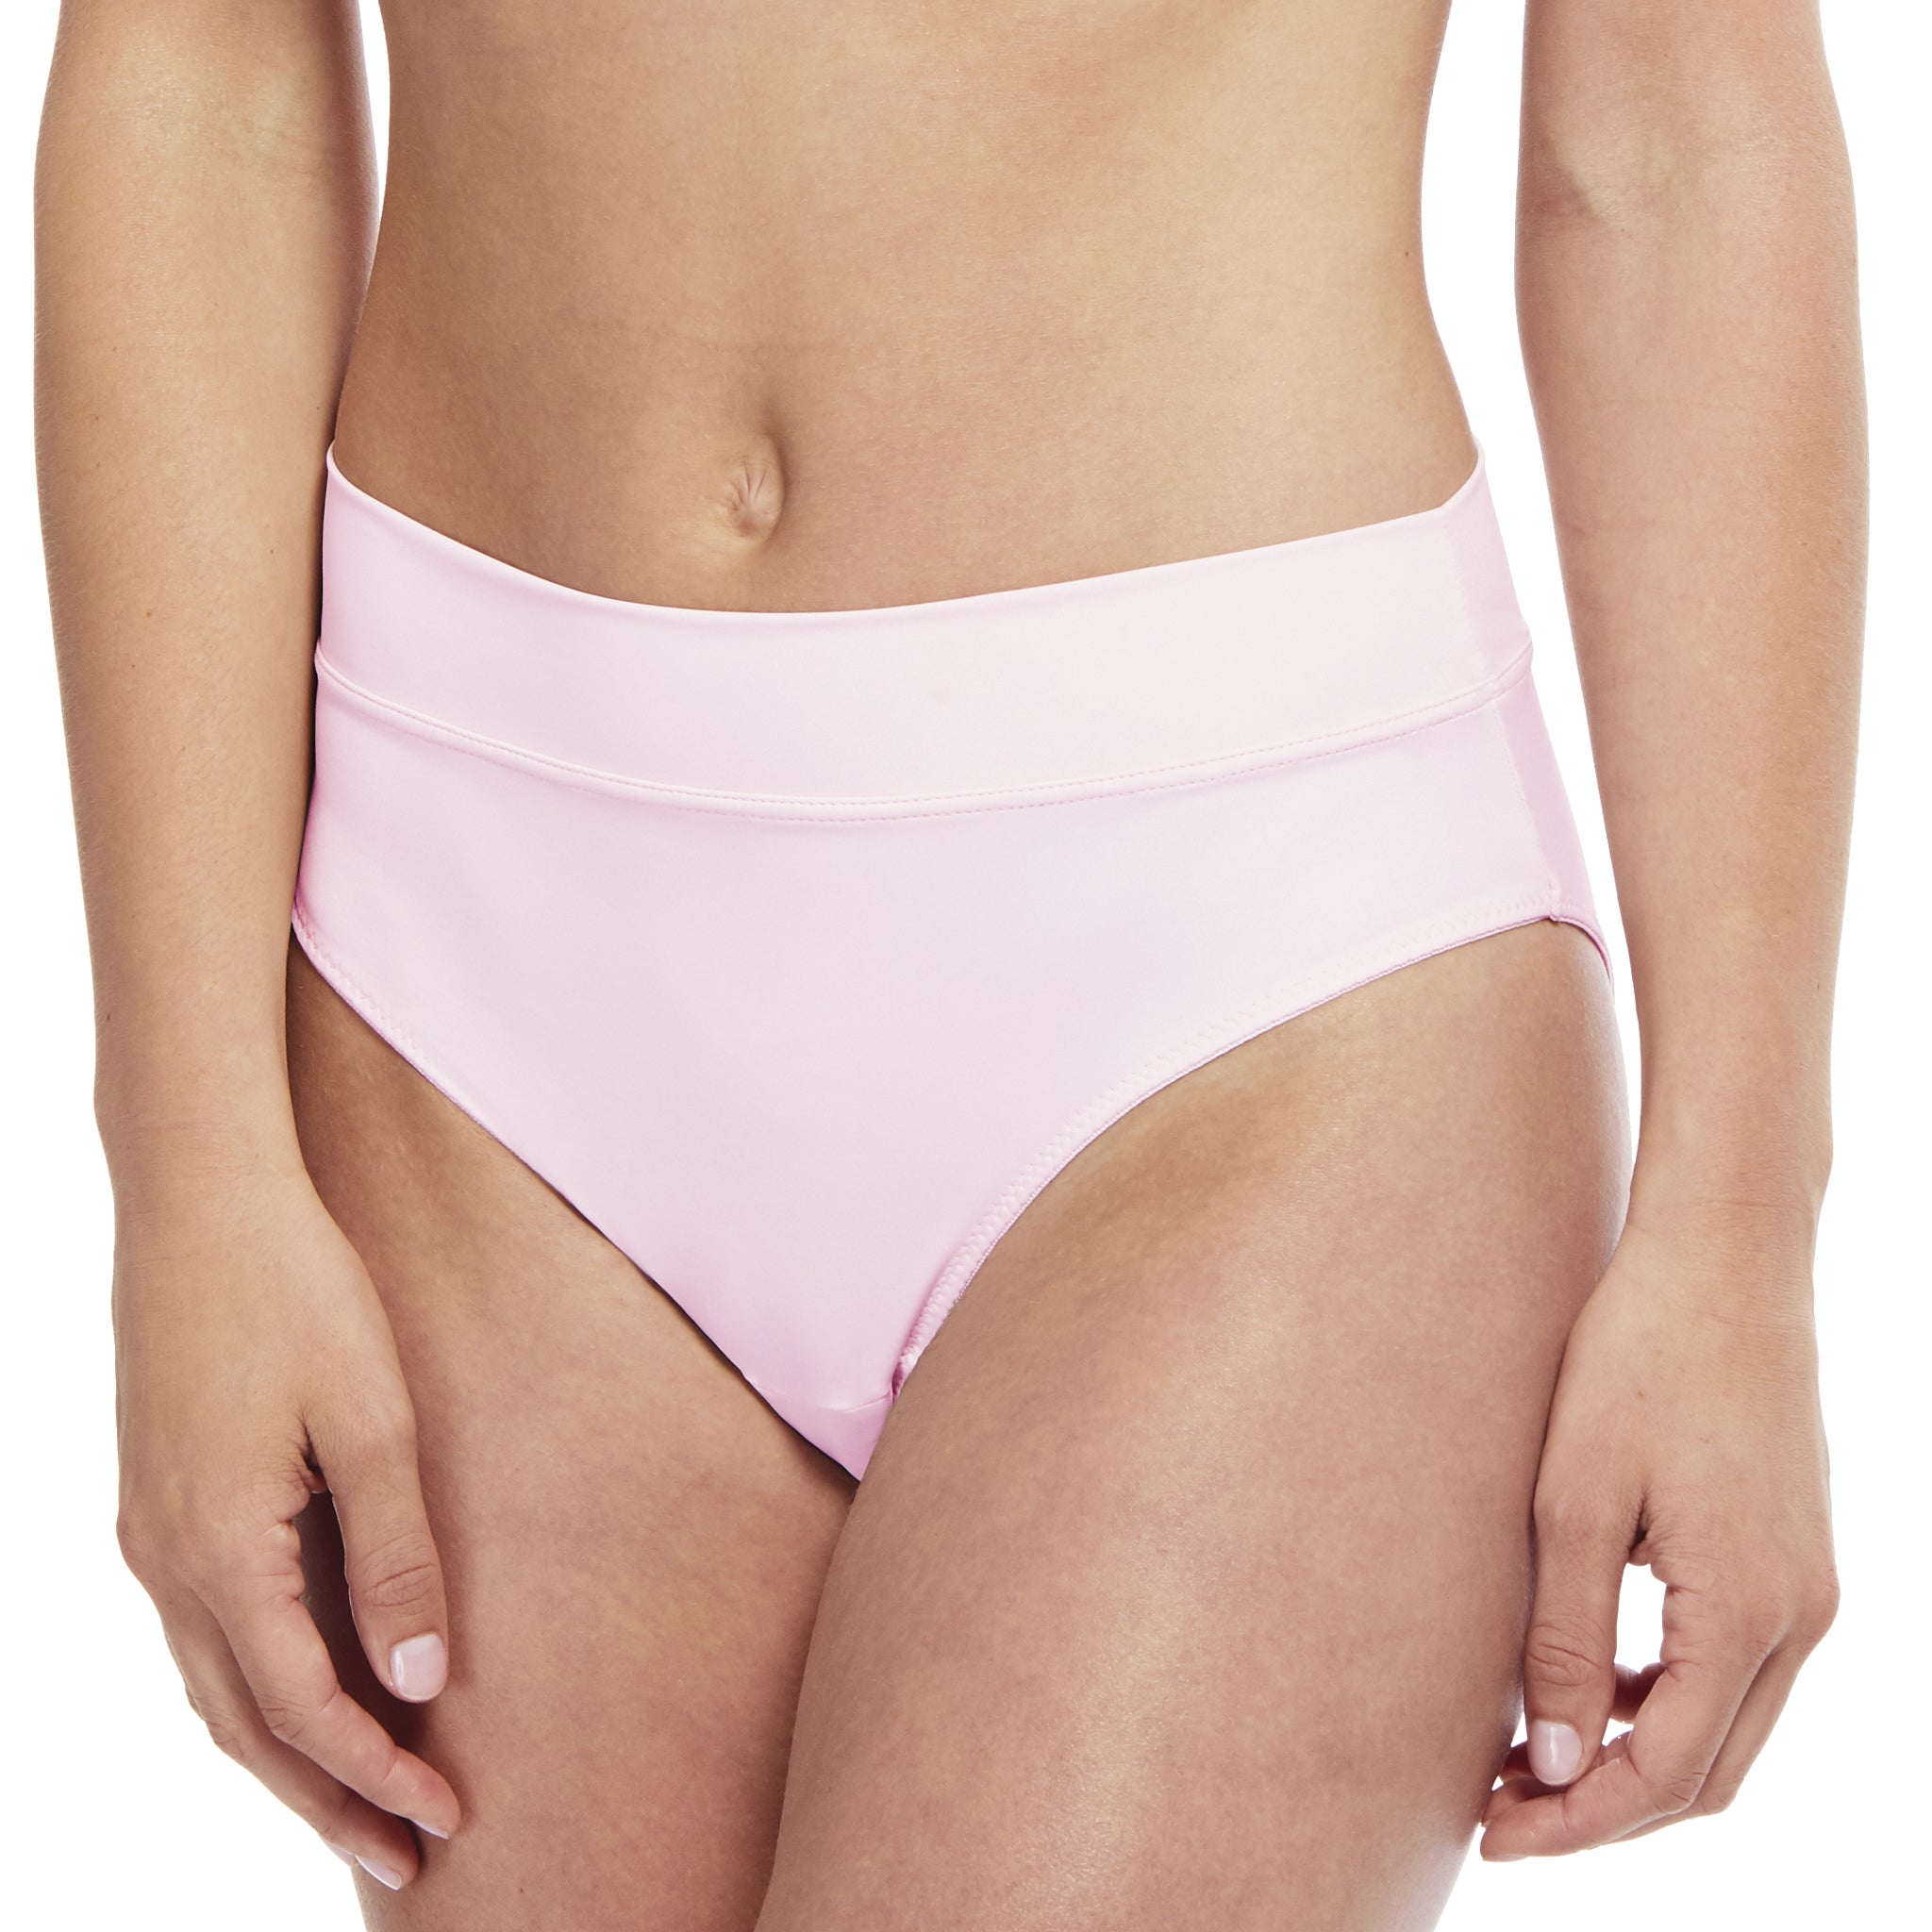 Leakproof Dual Action Underwear - 2 in 1 Incontinence and Period Panties